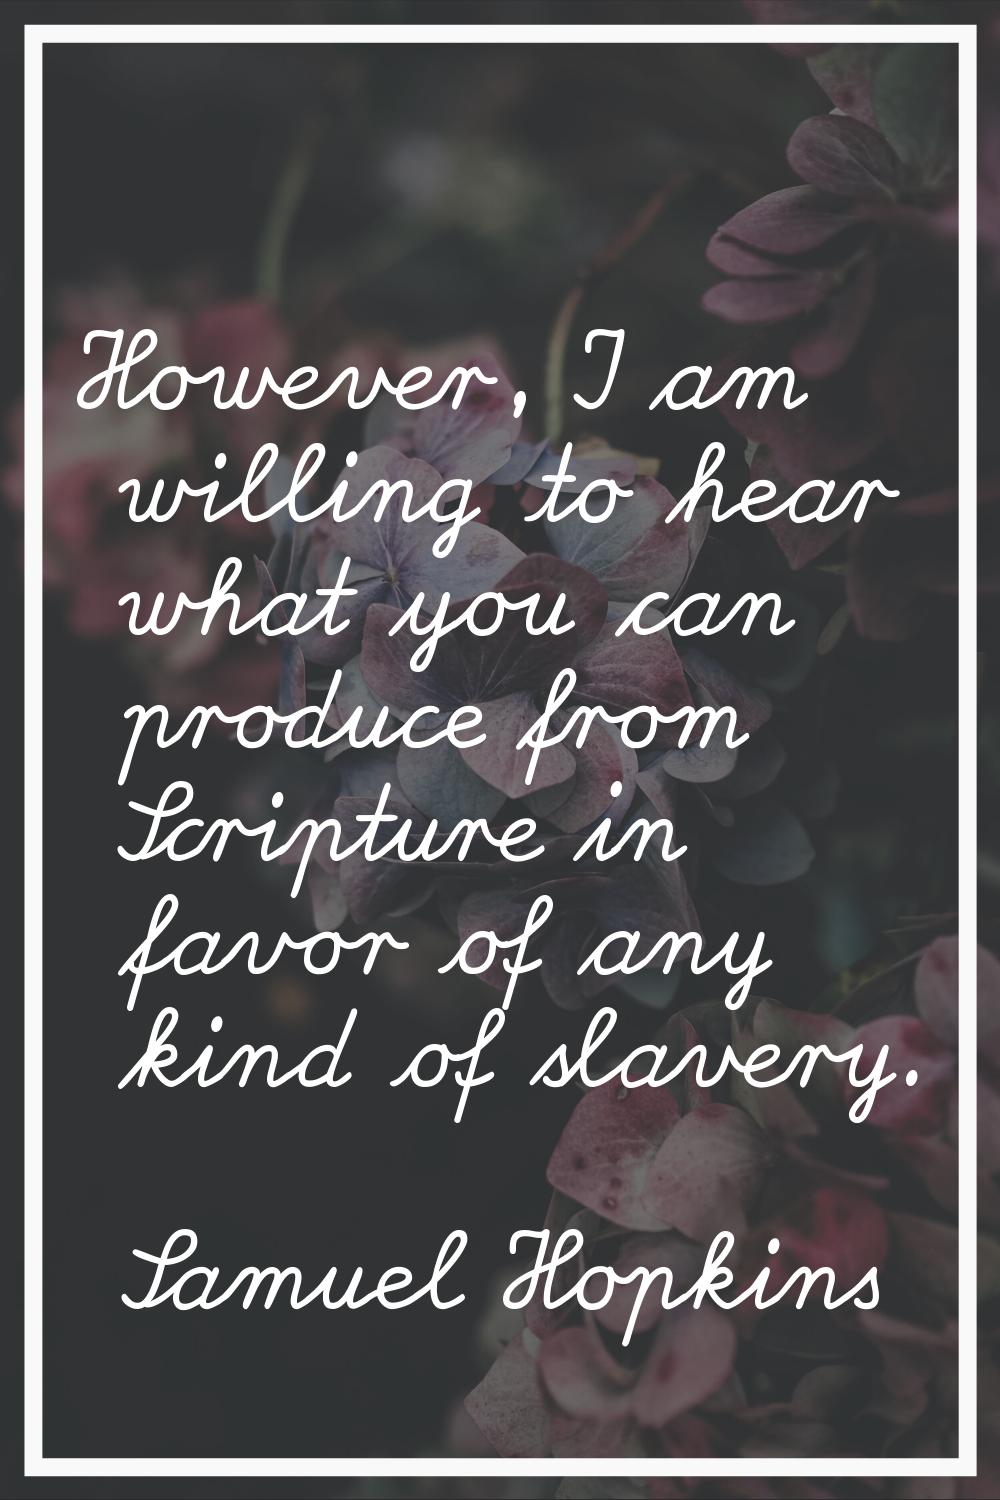 However, I am willing to hear what you can produce from Scripture in favor of any kind of slavery.